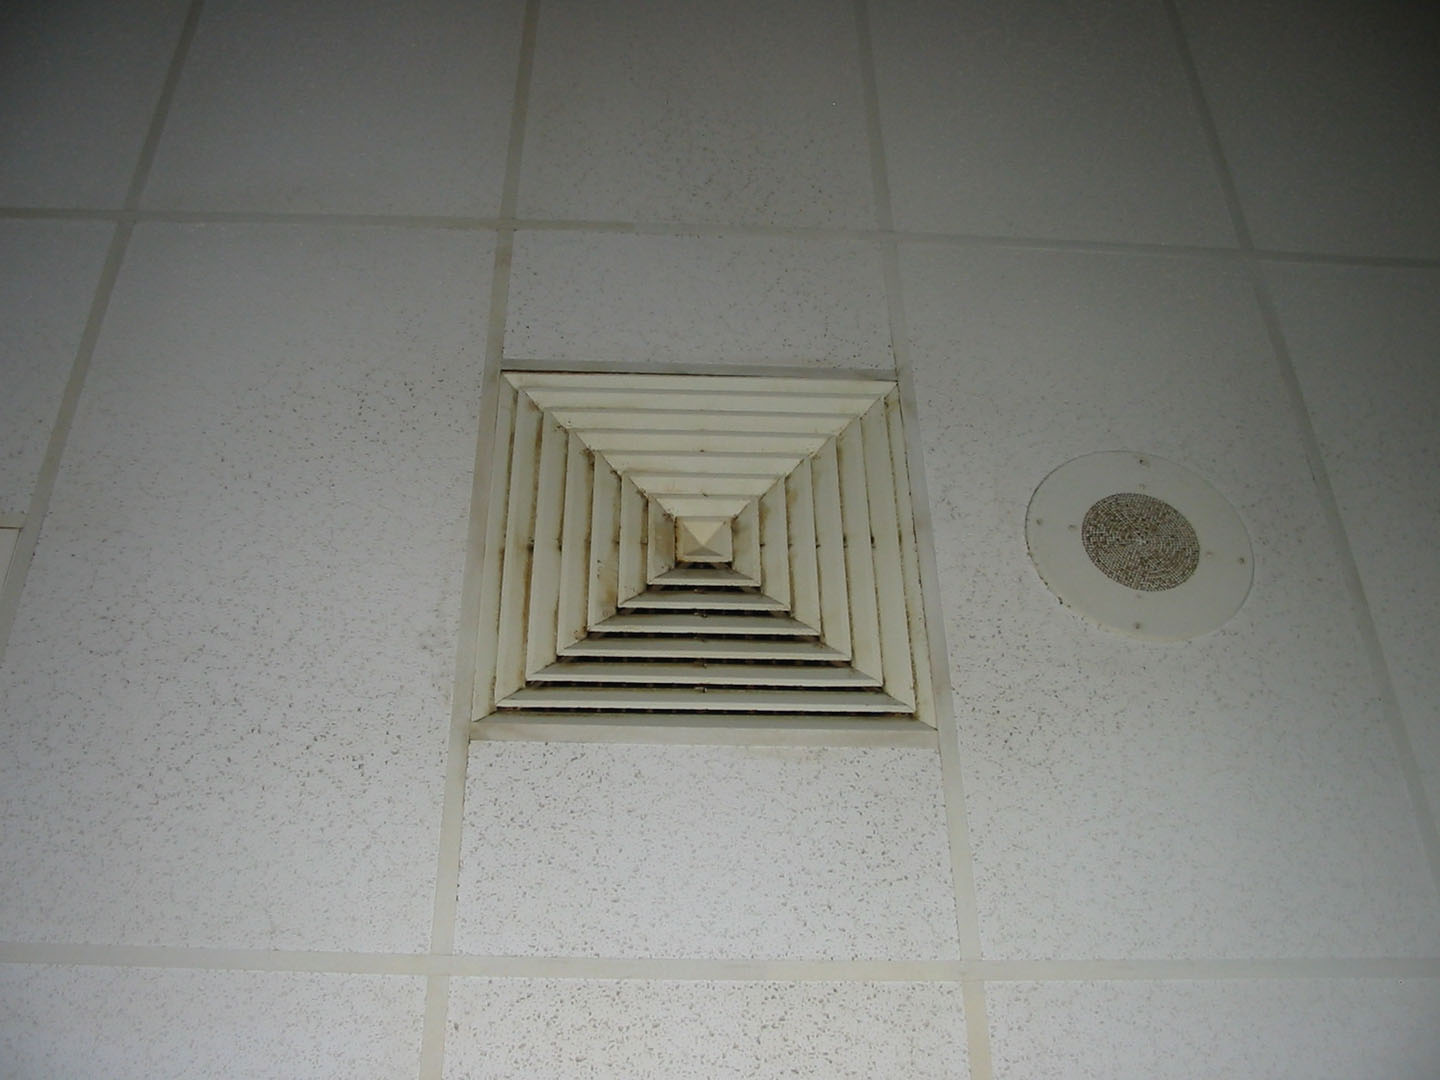 A ceiling exhaust on the floor